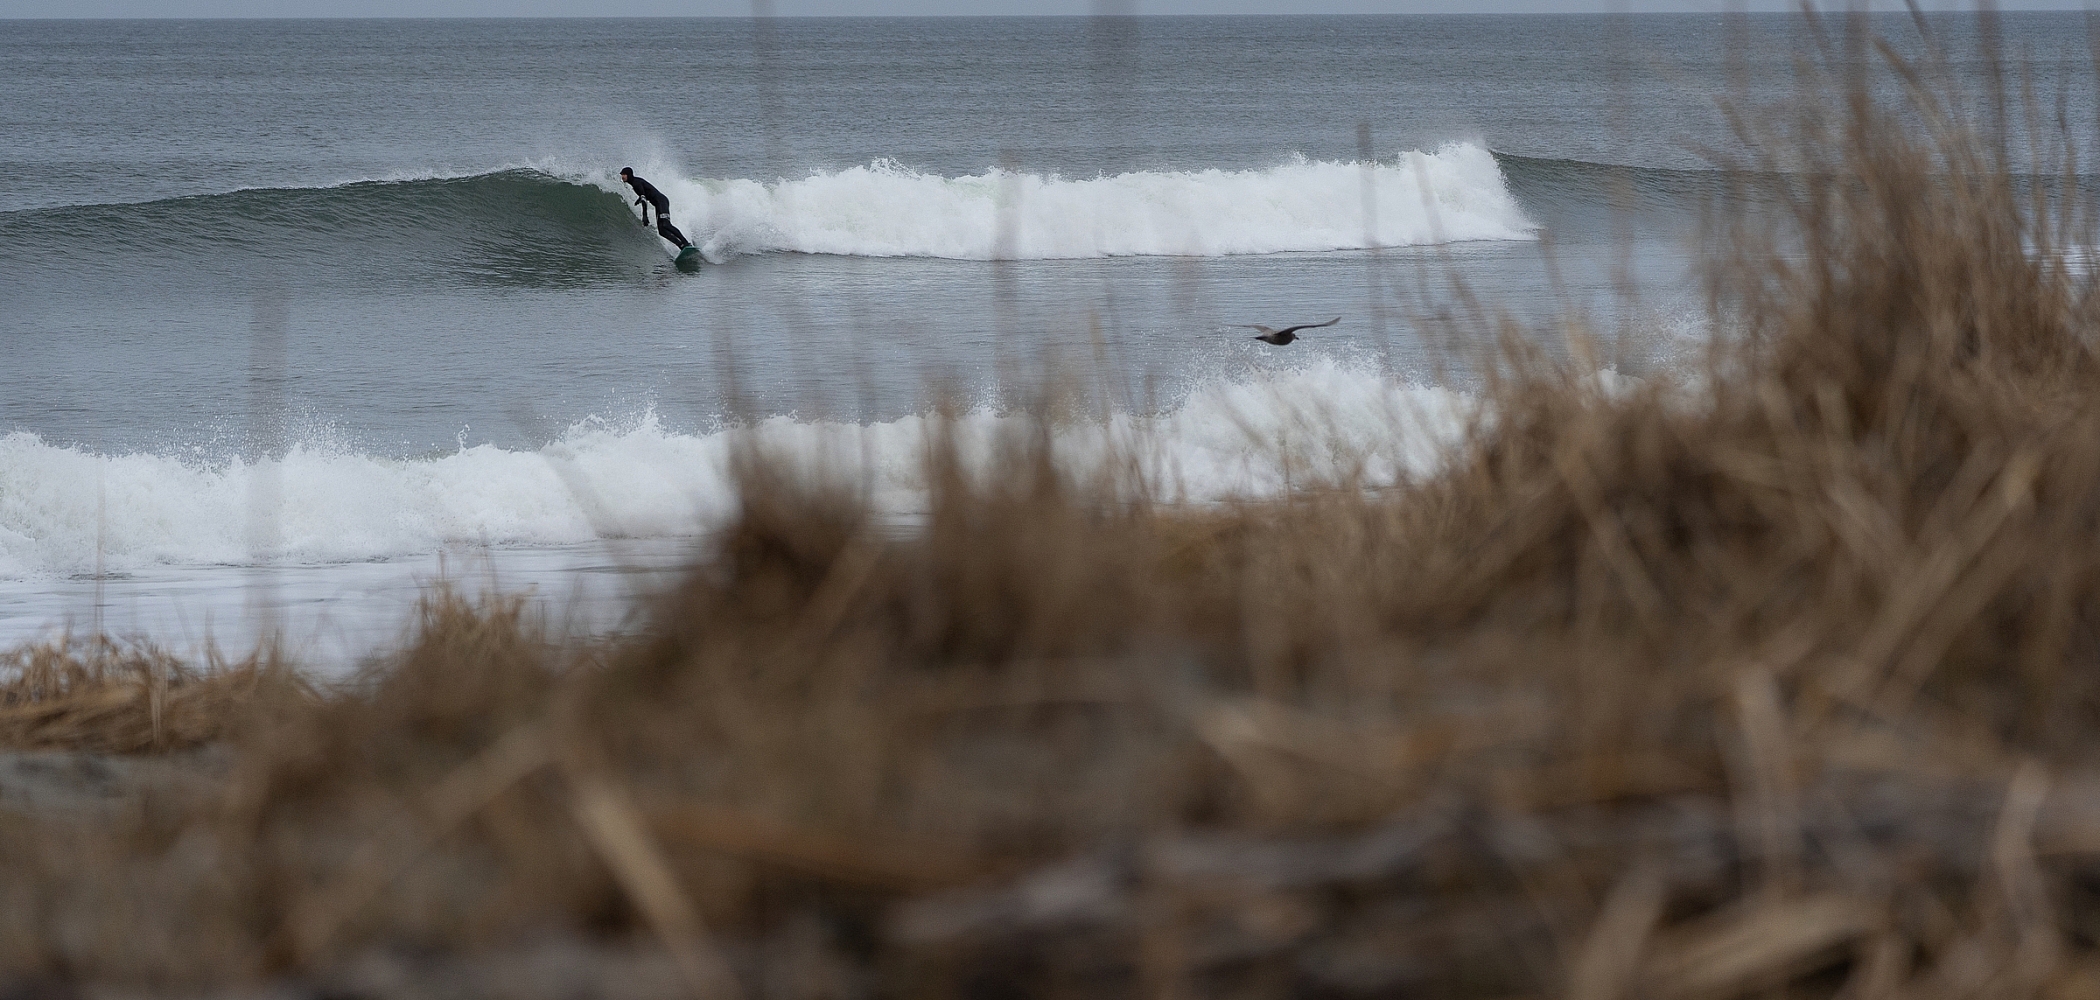 A person is catching a wave in the distance at Naikoon Provincial Park. Dried grasses are out of focus in the foreground of the frame.